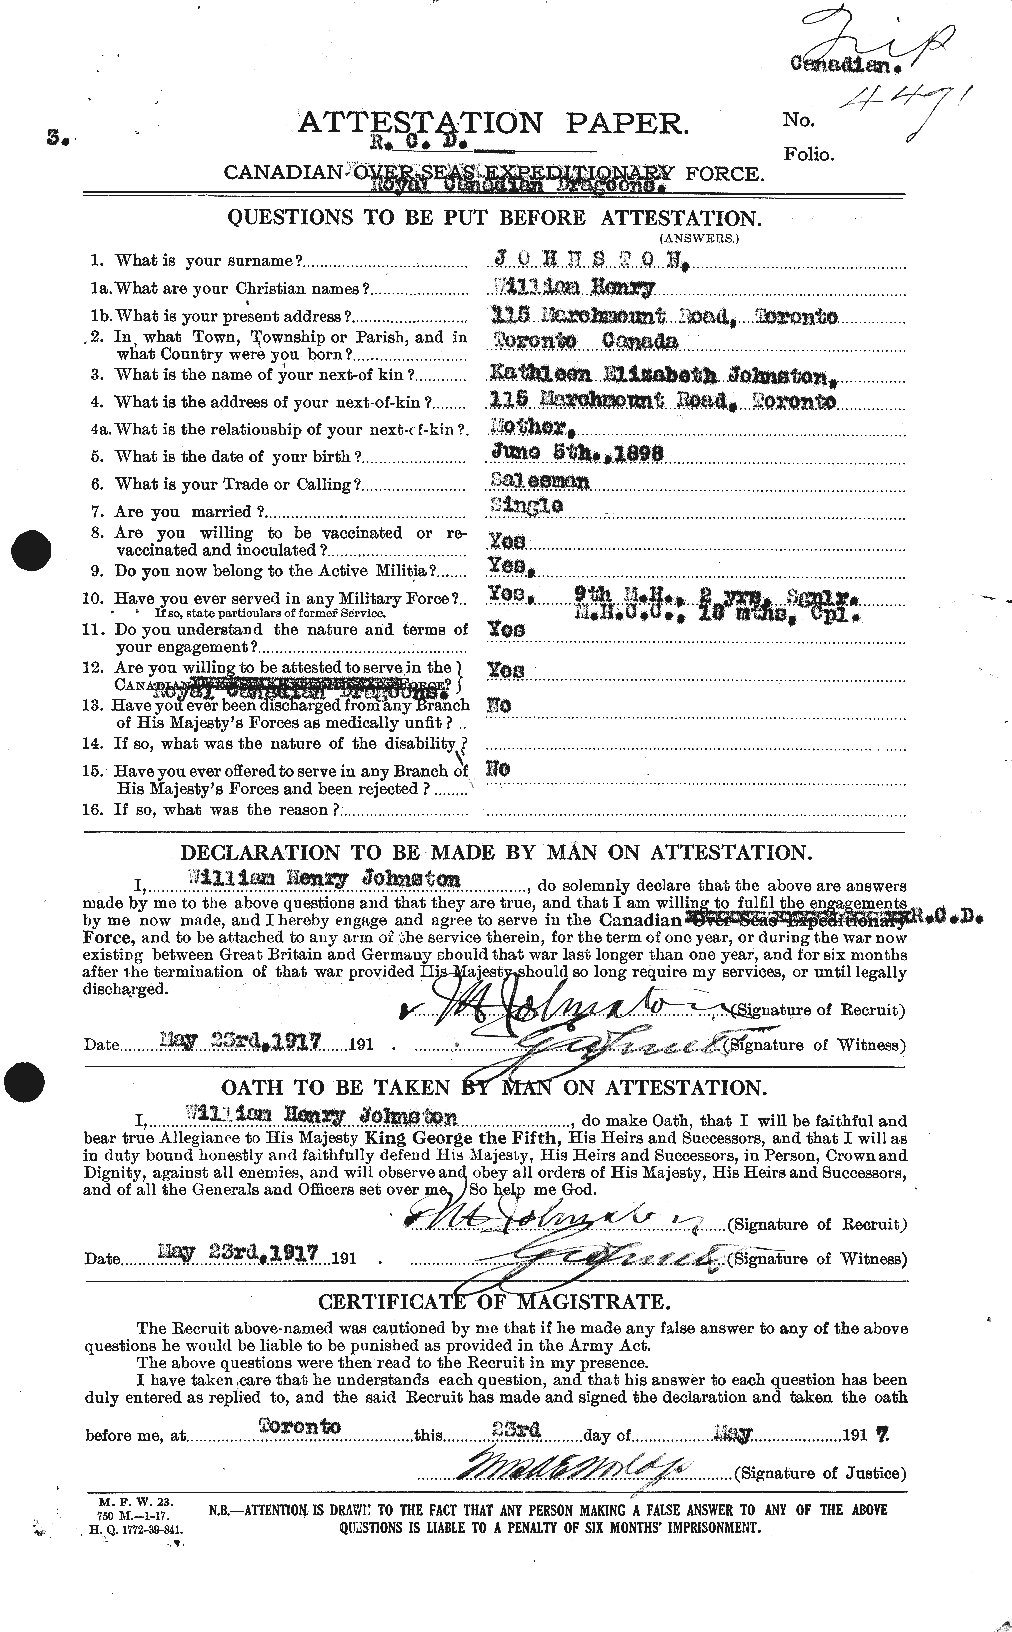 Personnel Records of the First World War - CEF 427338a